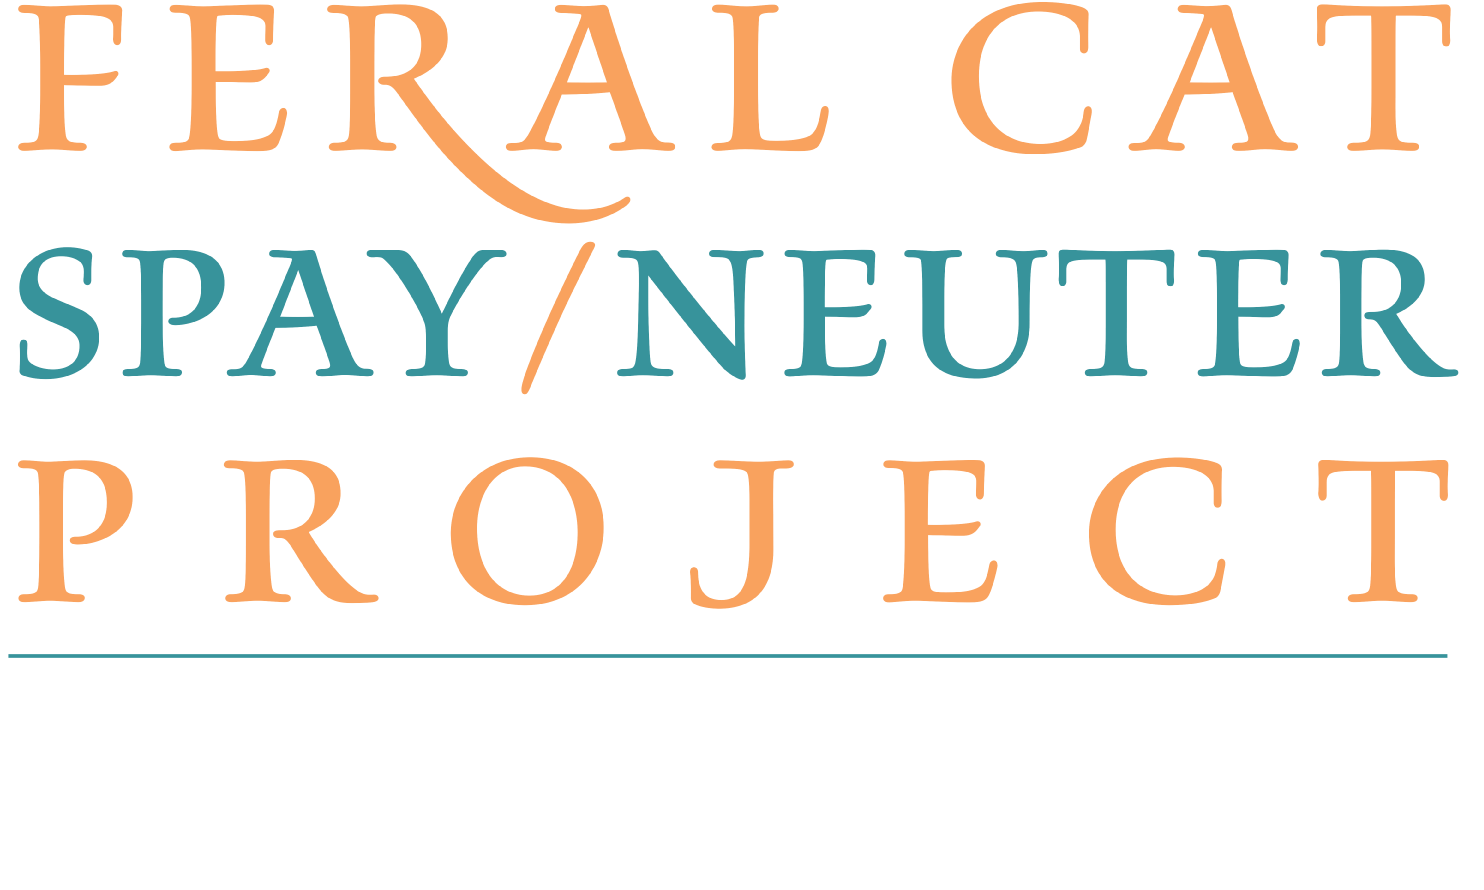 Feral Cat Spay/Neuter Project